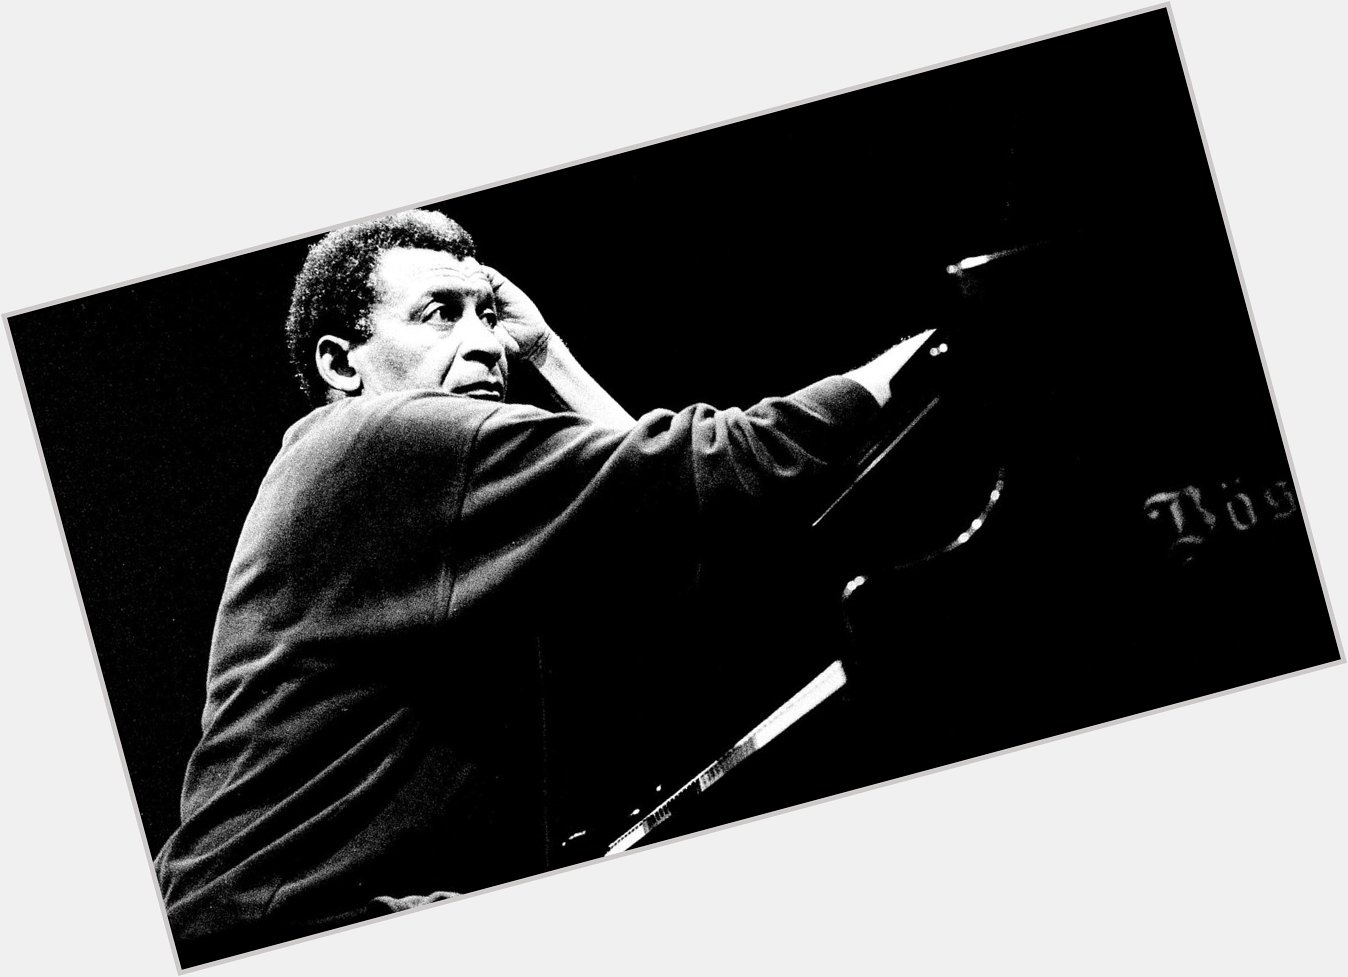  Happy birthday Abdullah Ibrahim! 

The great South African pianist and composer is 86 today. 